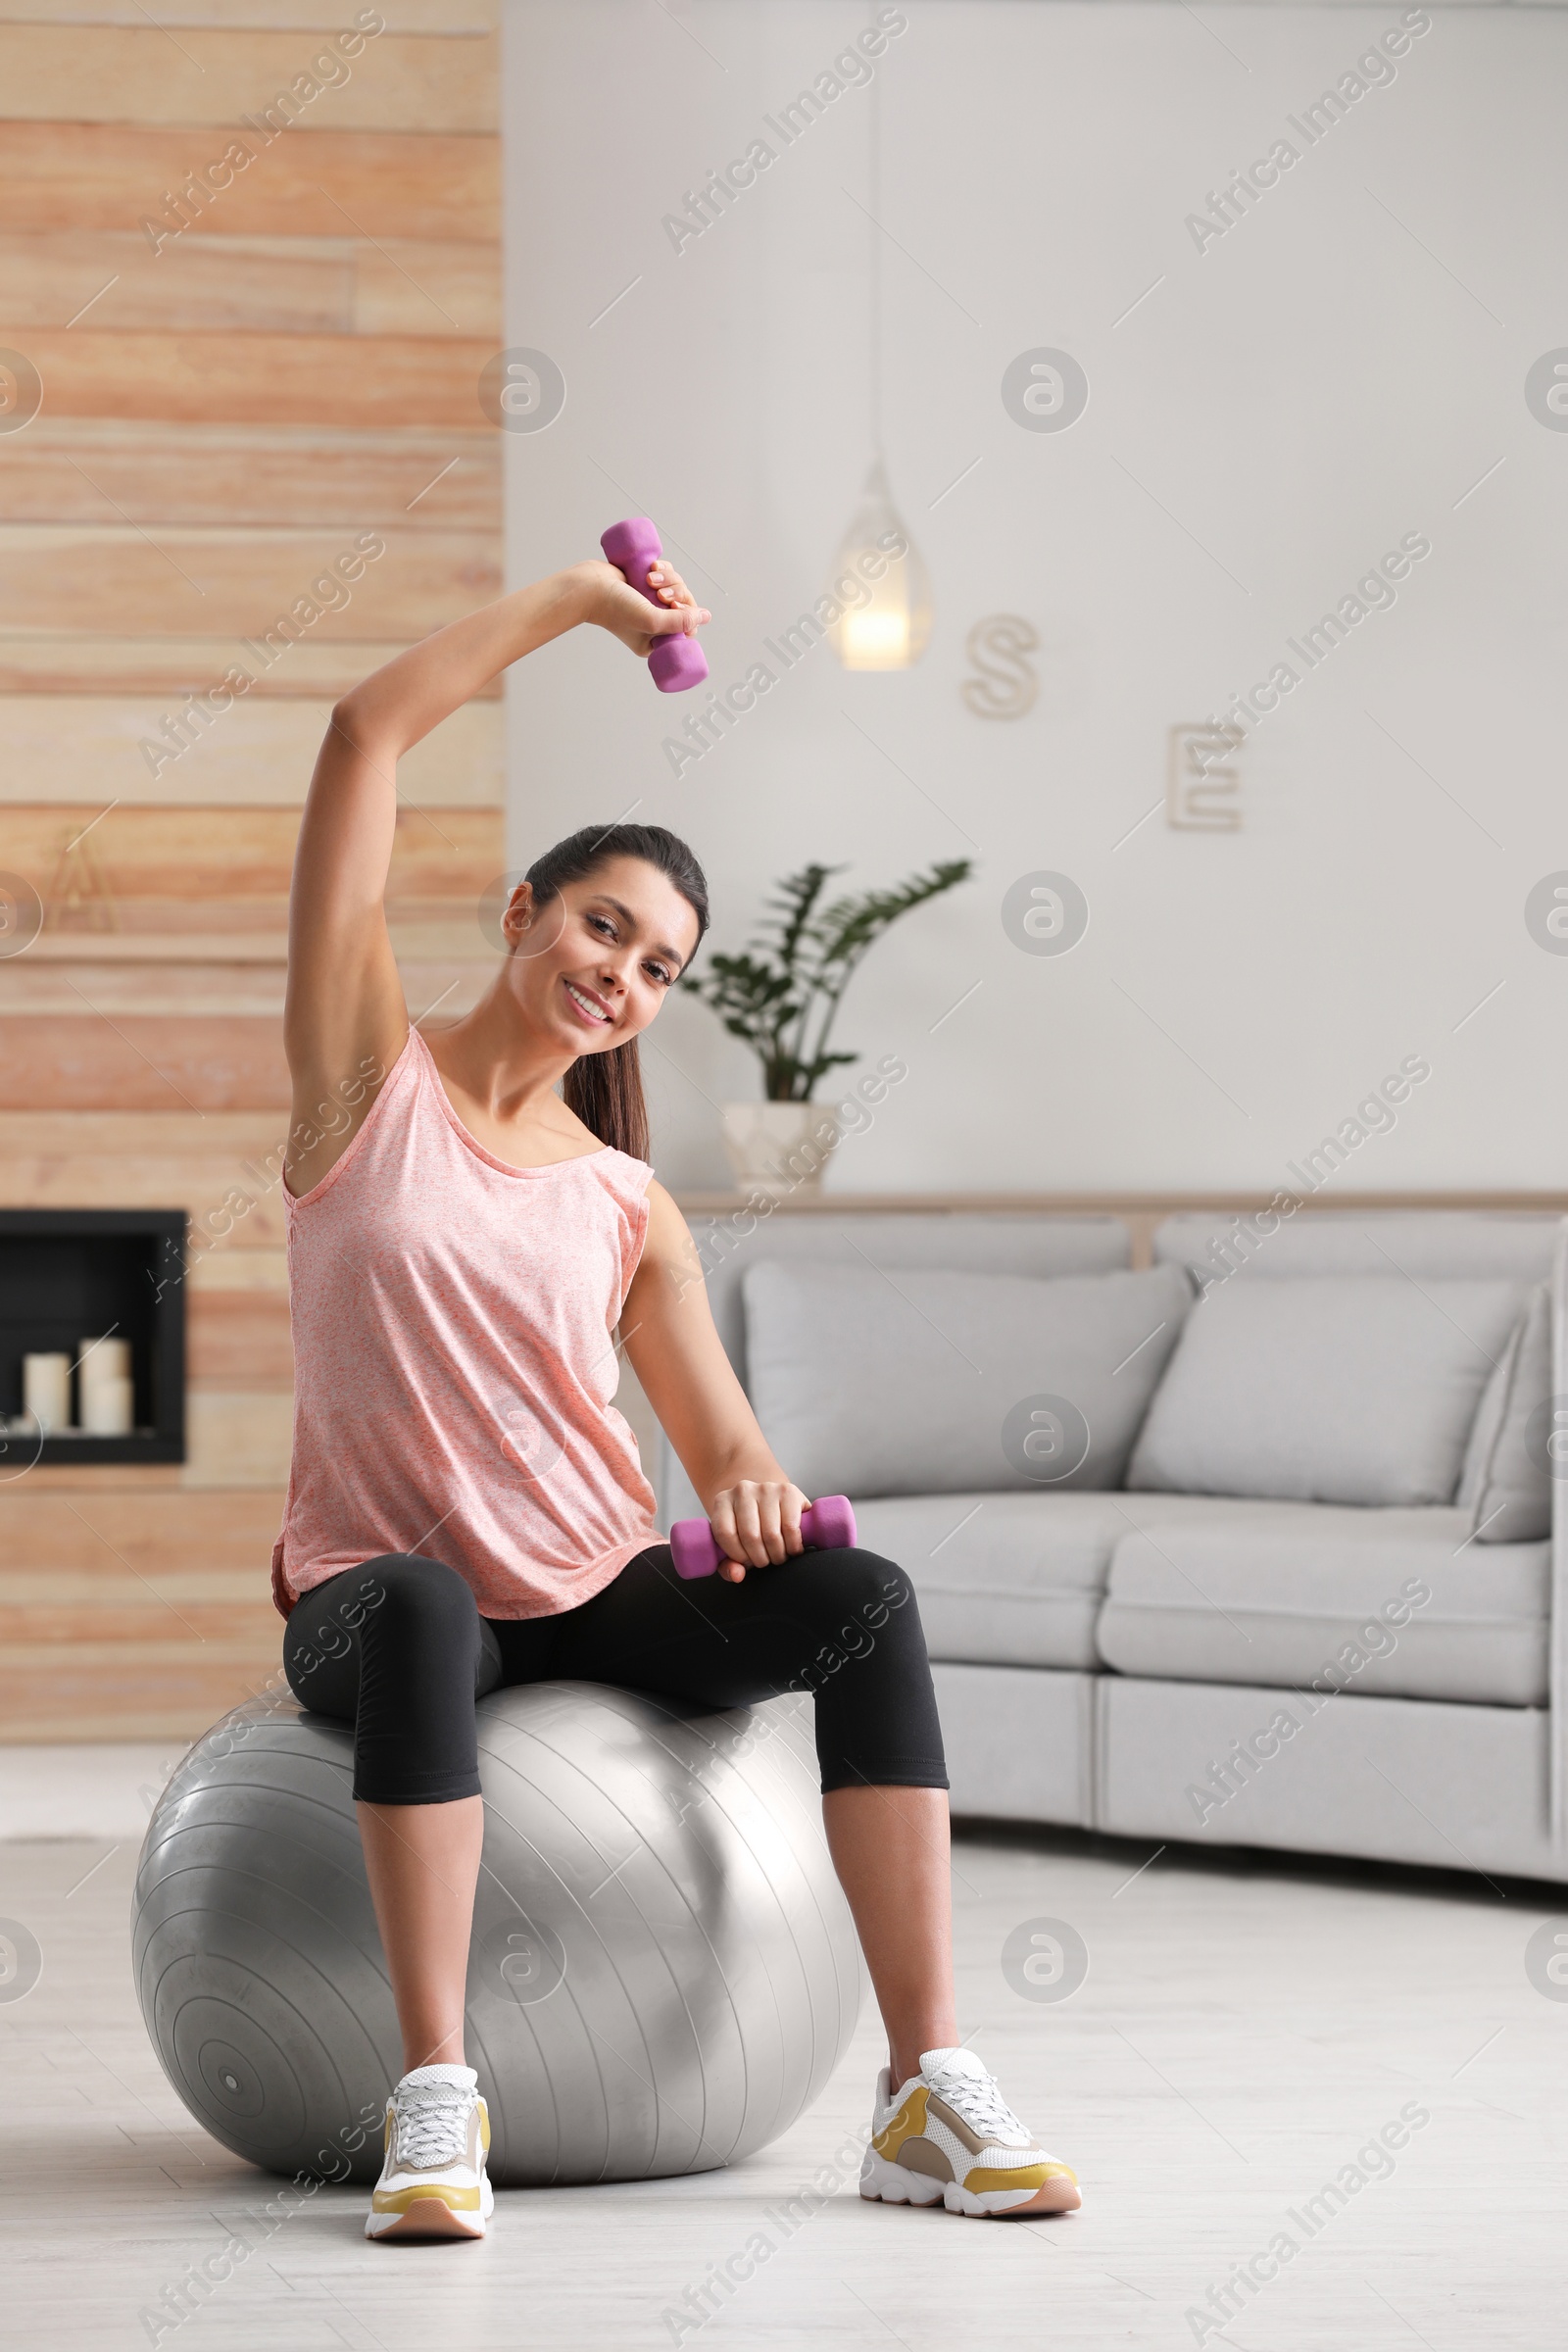 Photo of Young woman doing exercise with dumbbells on fitness ball at home